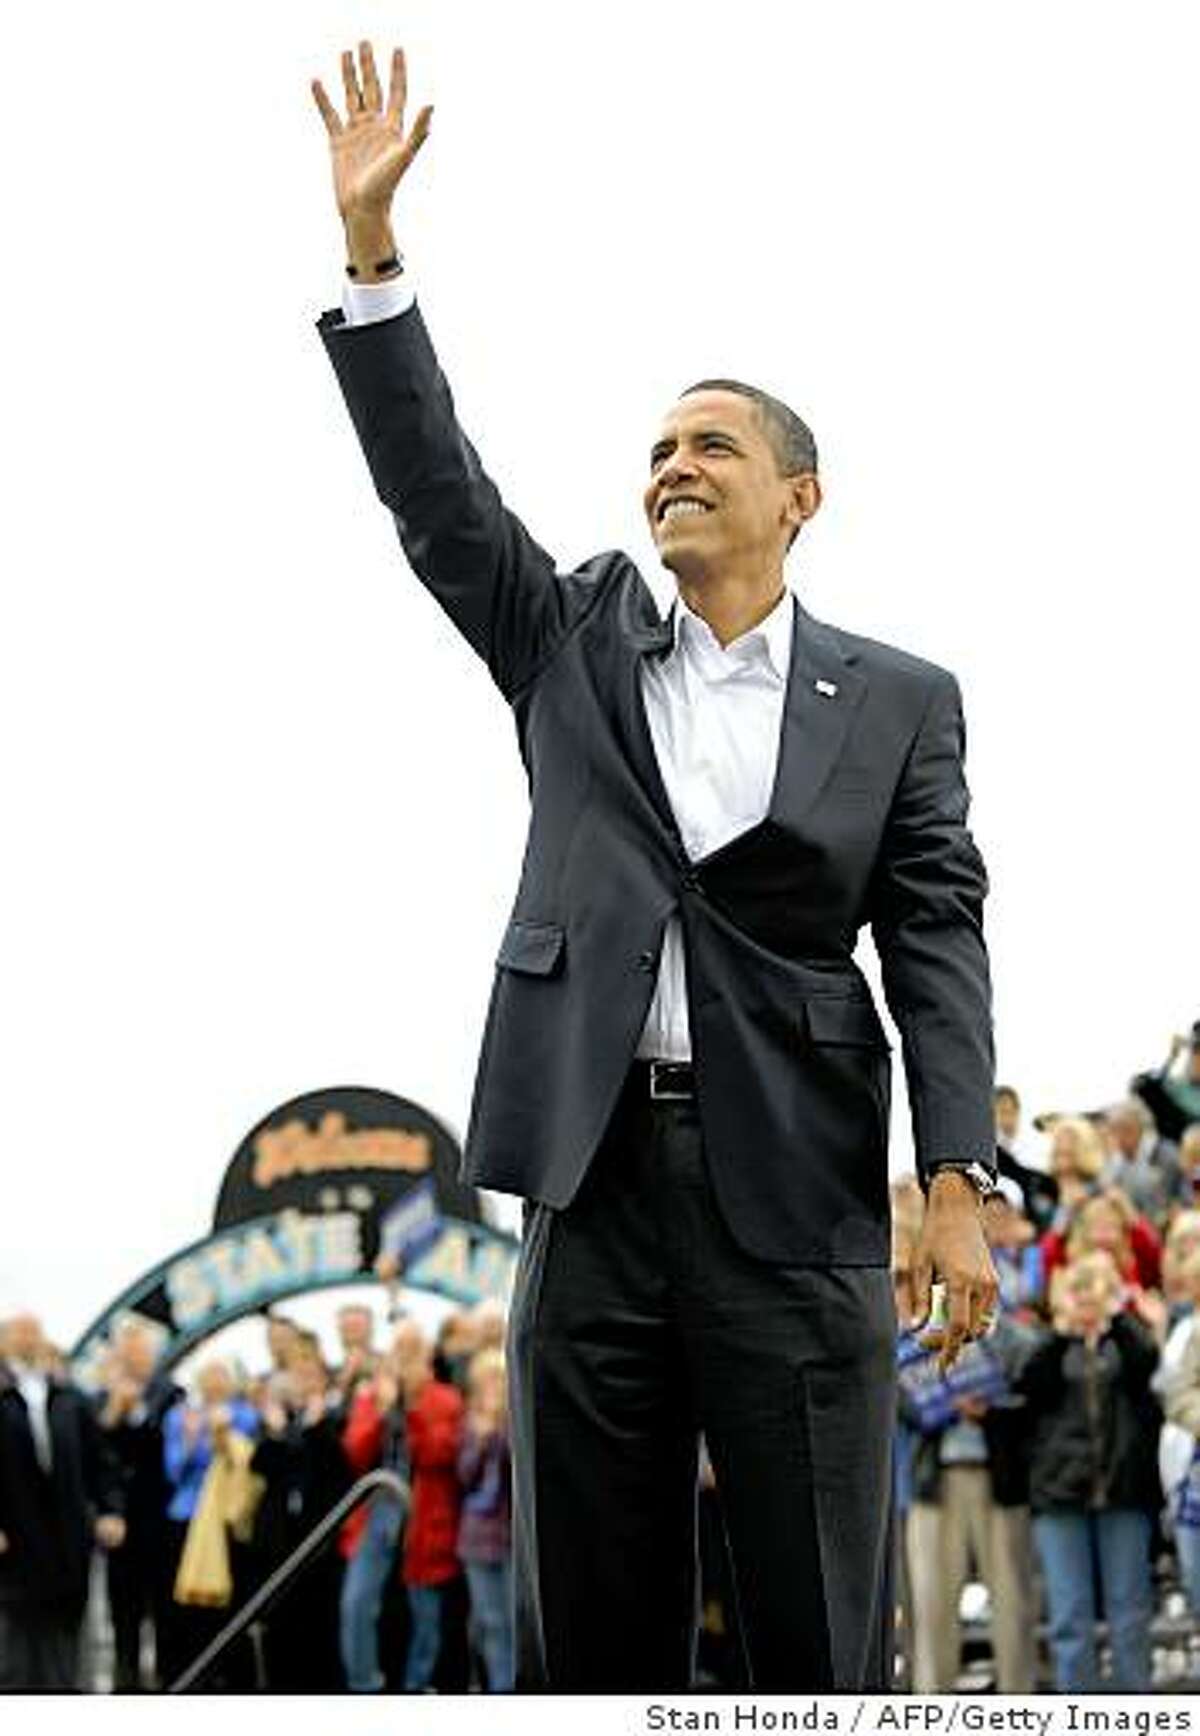 US Democratic presidential candidate Illinois Senator Barack Obama waves to the crowd at a rally October 8, 2008 at the Indiana State Fairgrounds in Indianapolis, Indiana. AFP PHOTO/Stan HONDA (Photo credit should read STAN HONDA/AFP/Getty Images)